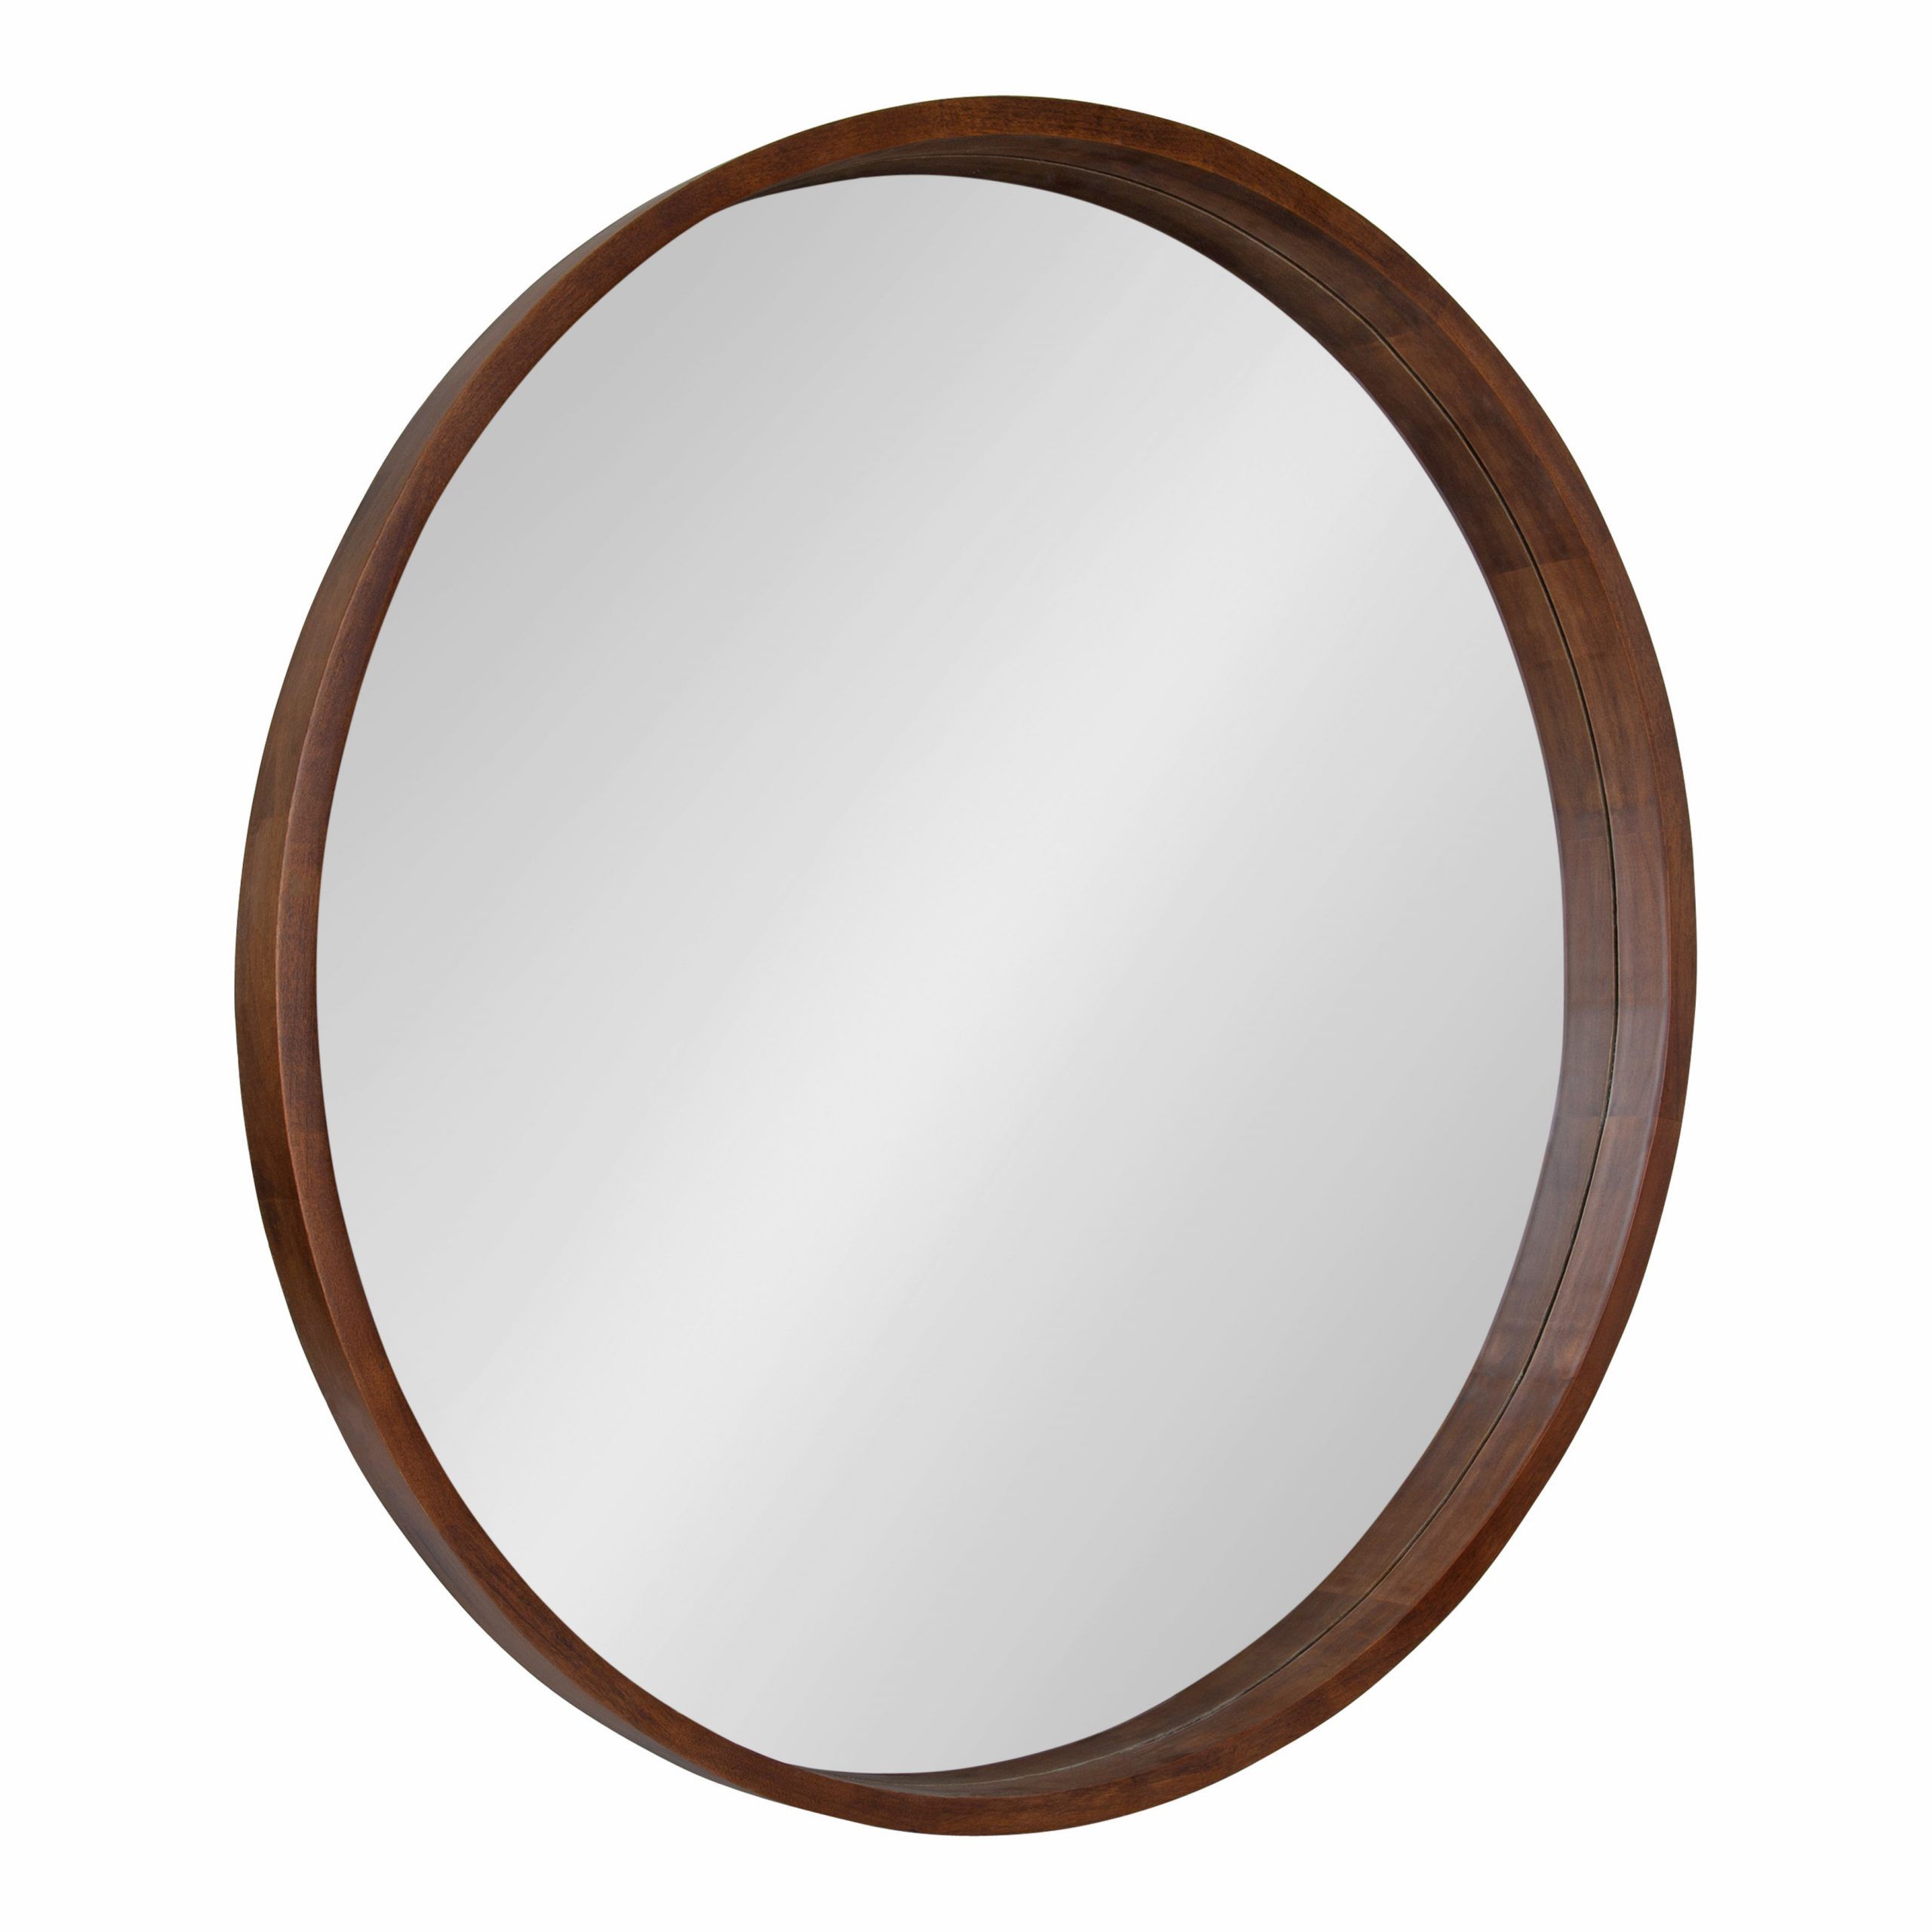 Kate And Laurel Hutton Round Wood Wall Mirror, 36" Diameter, Walnut With Walnut Wood Wall Mirrors (View 15 of 15)